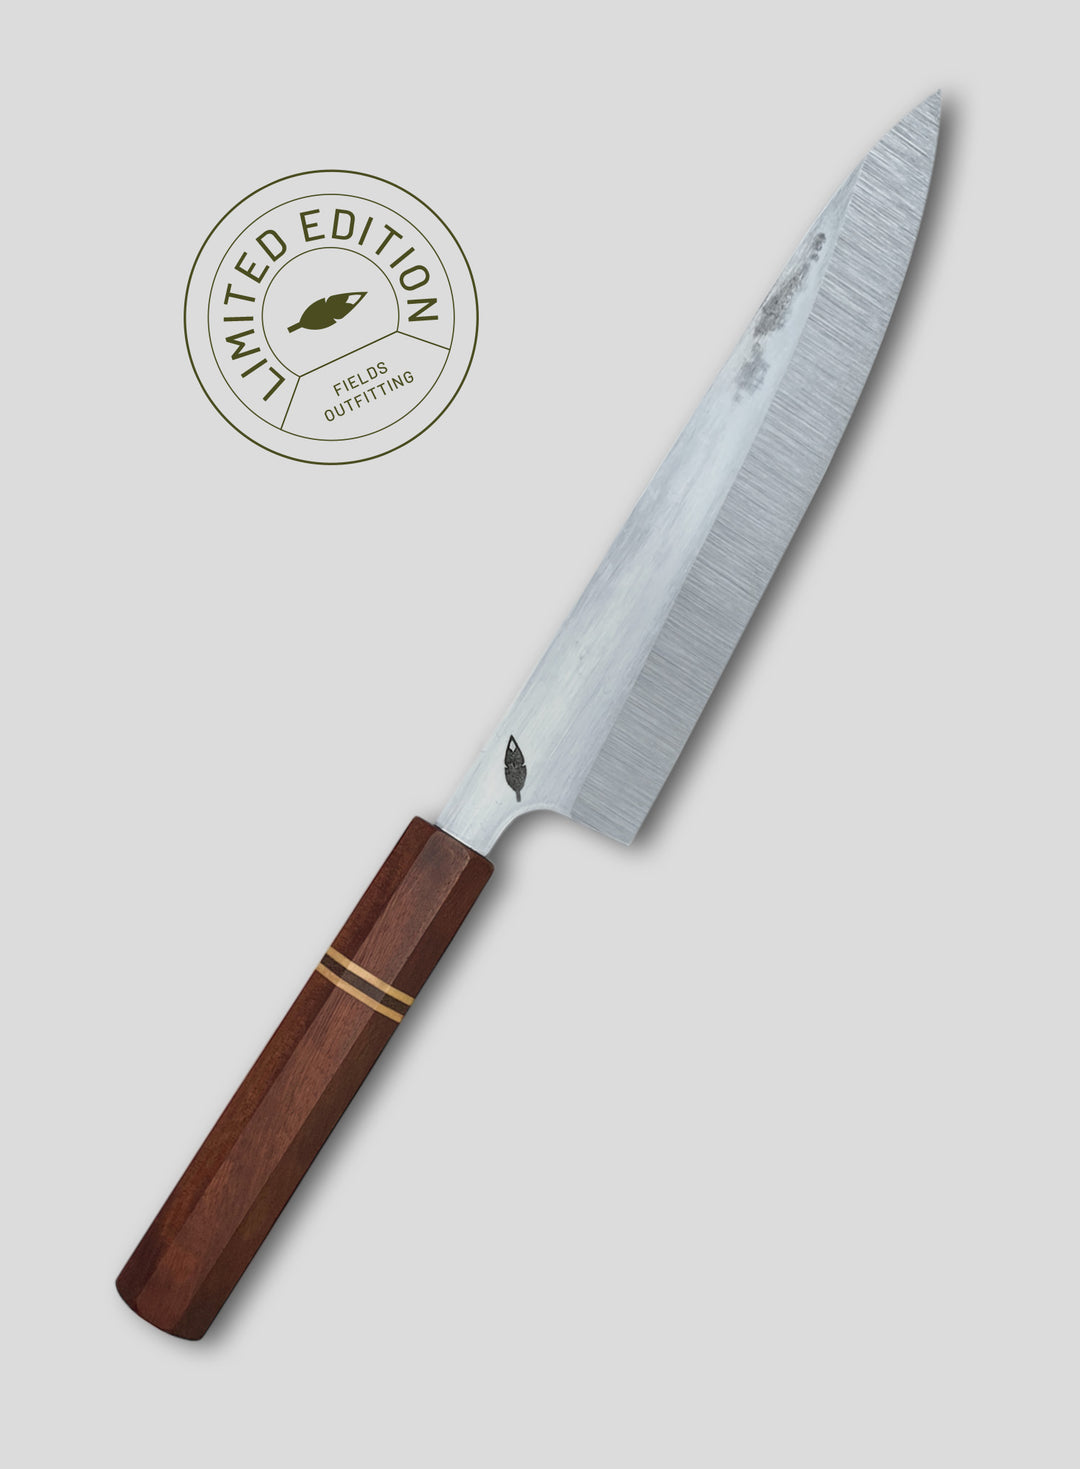 Limited Edition Furia (Guayacan and Ash Handle)